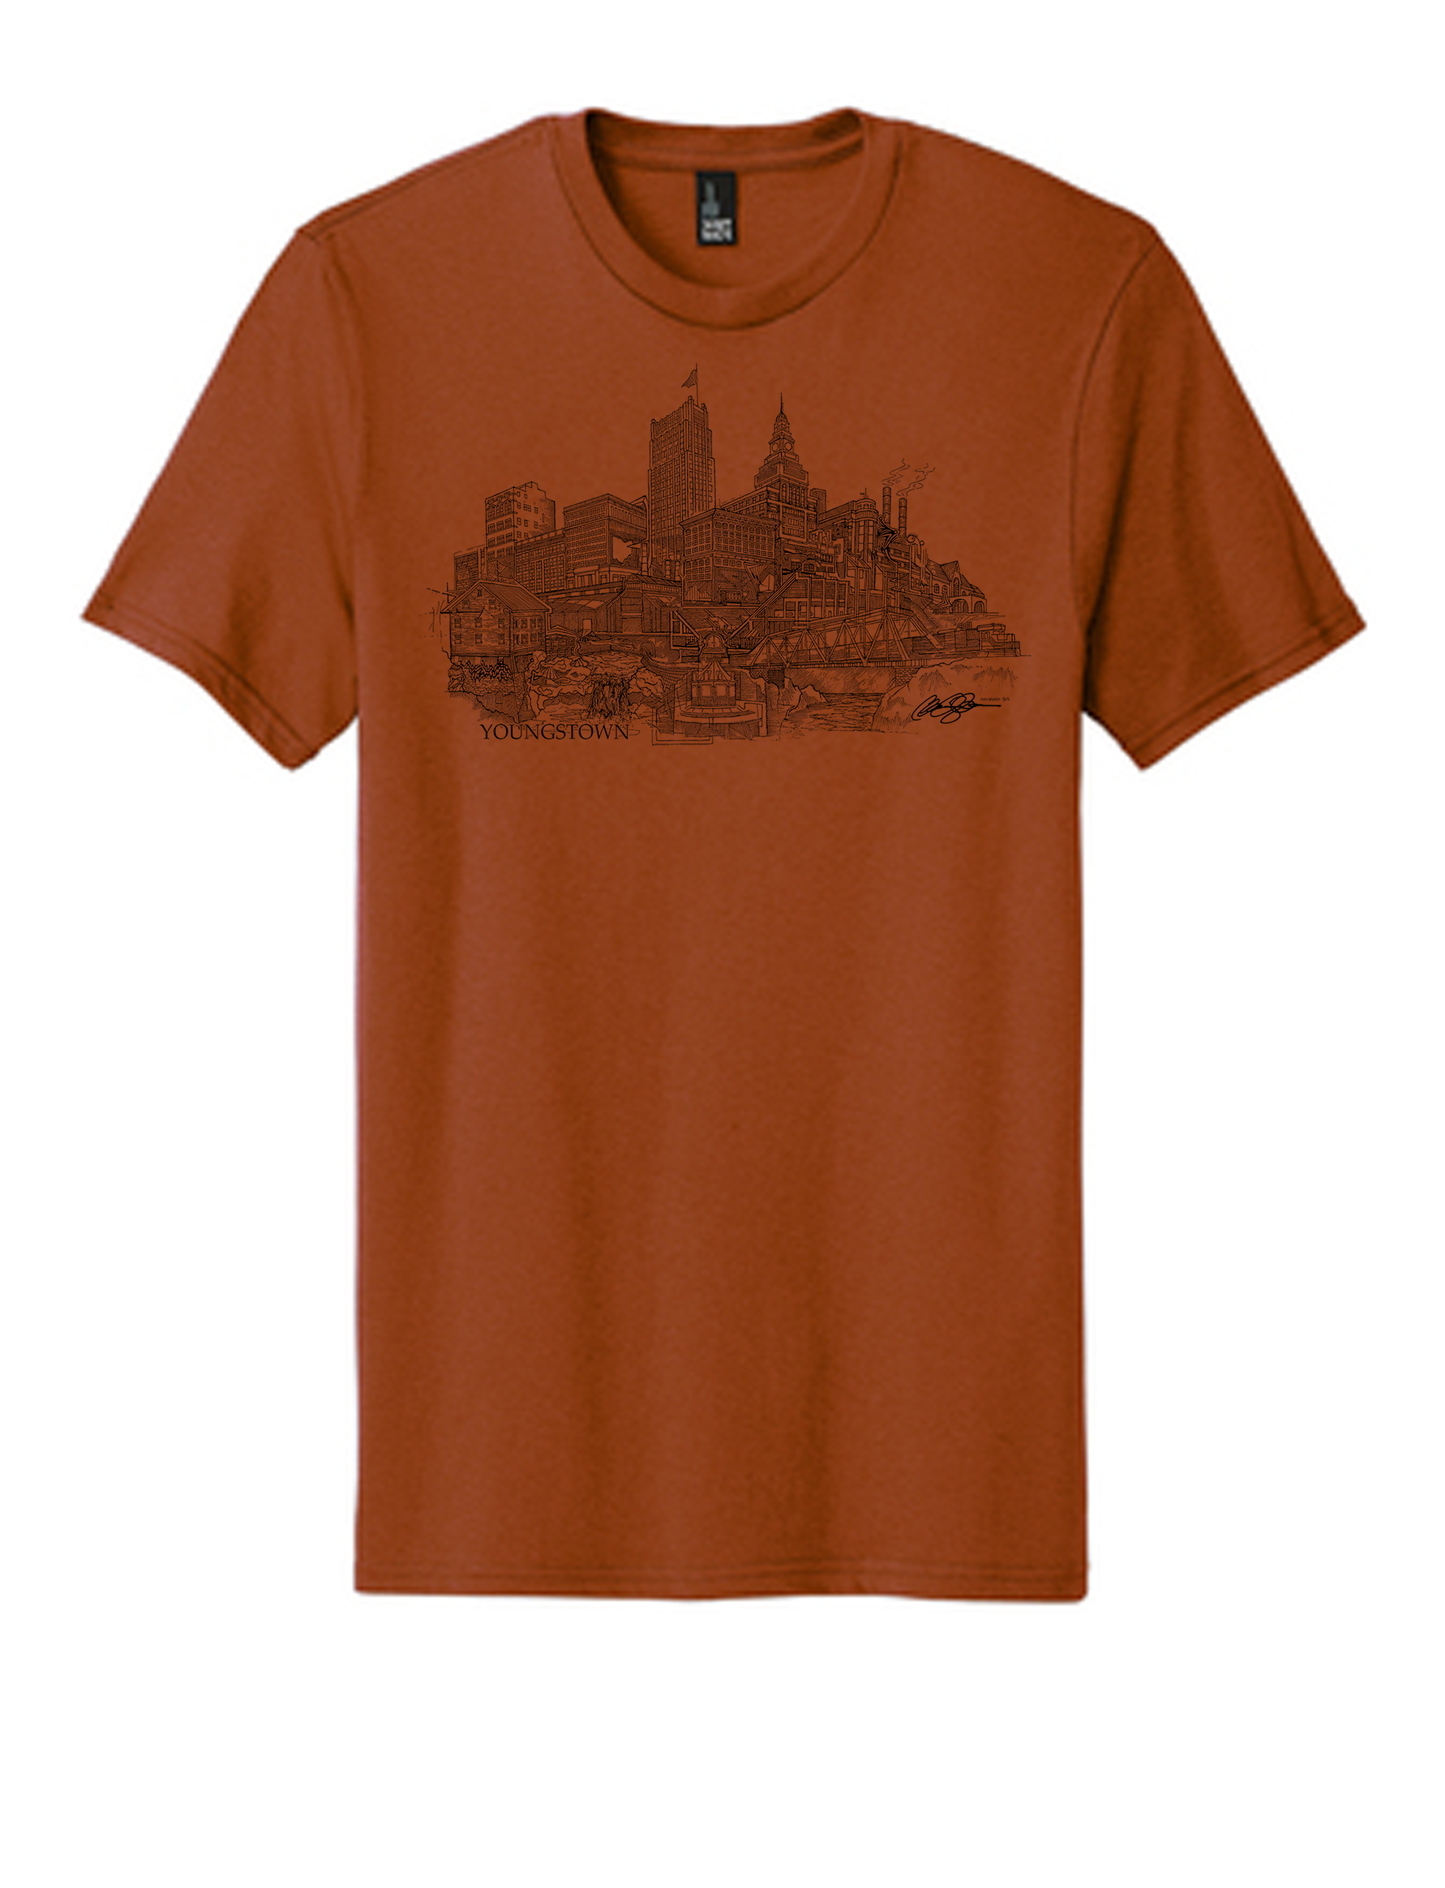 Youngstown T-Shirt Heather Grey